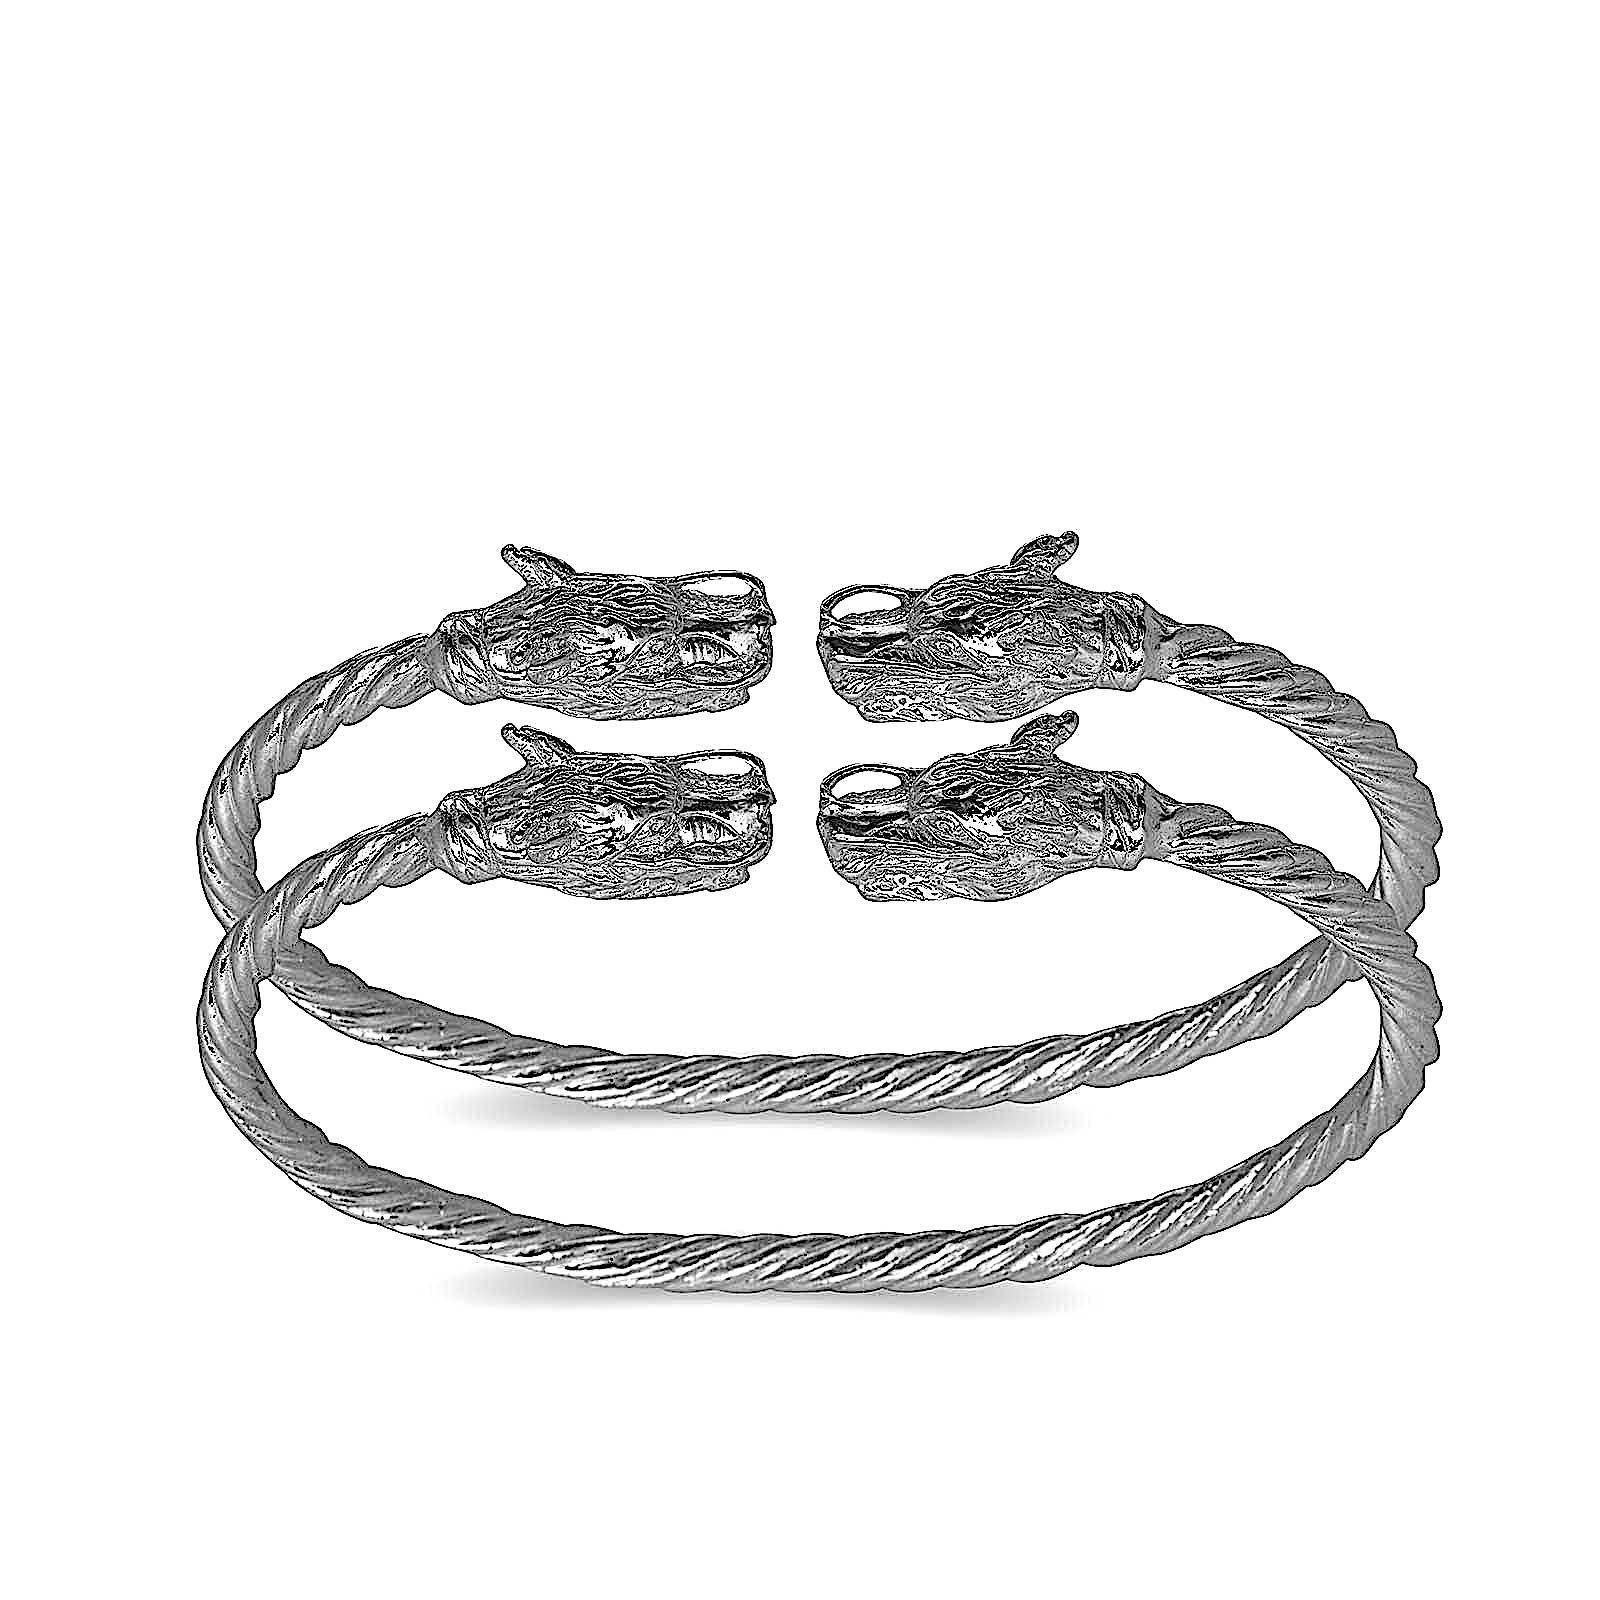 Dragon ends coiled rope West Indian bangles .925 Sterling silver (MADE IN USA) - Betterjewelry